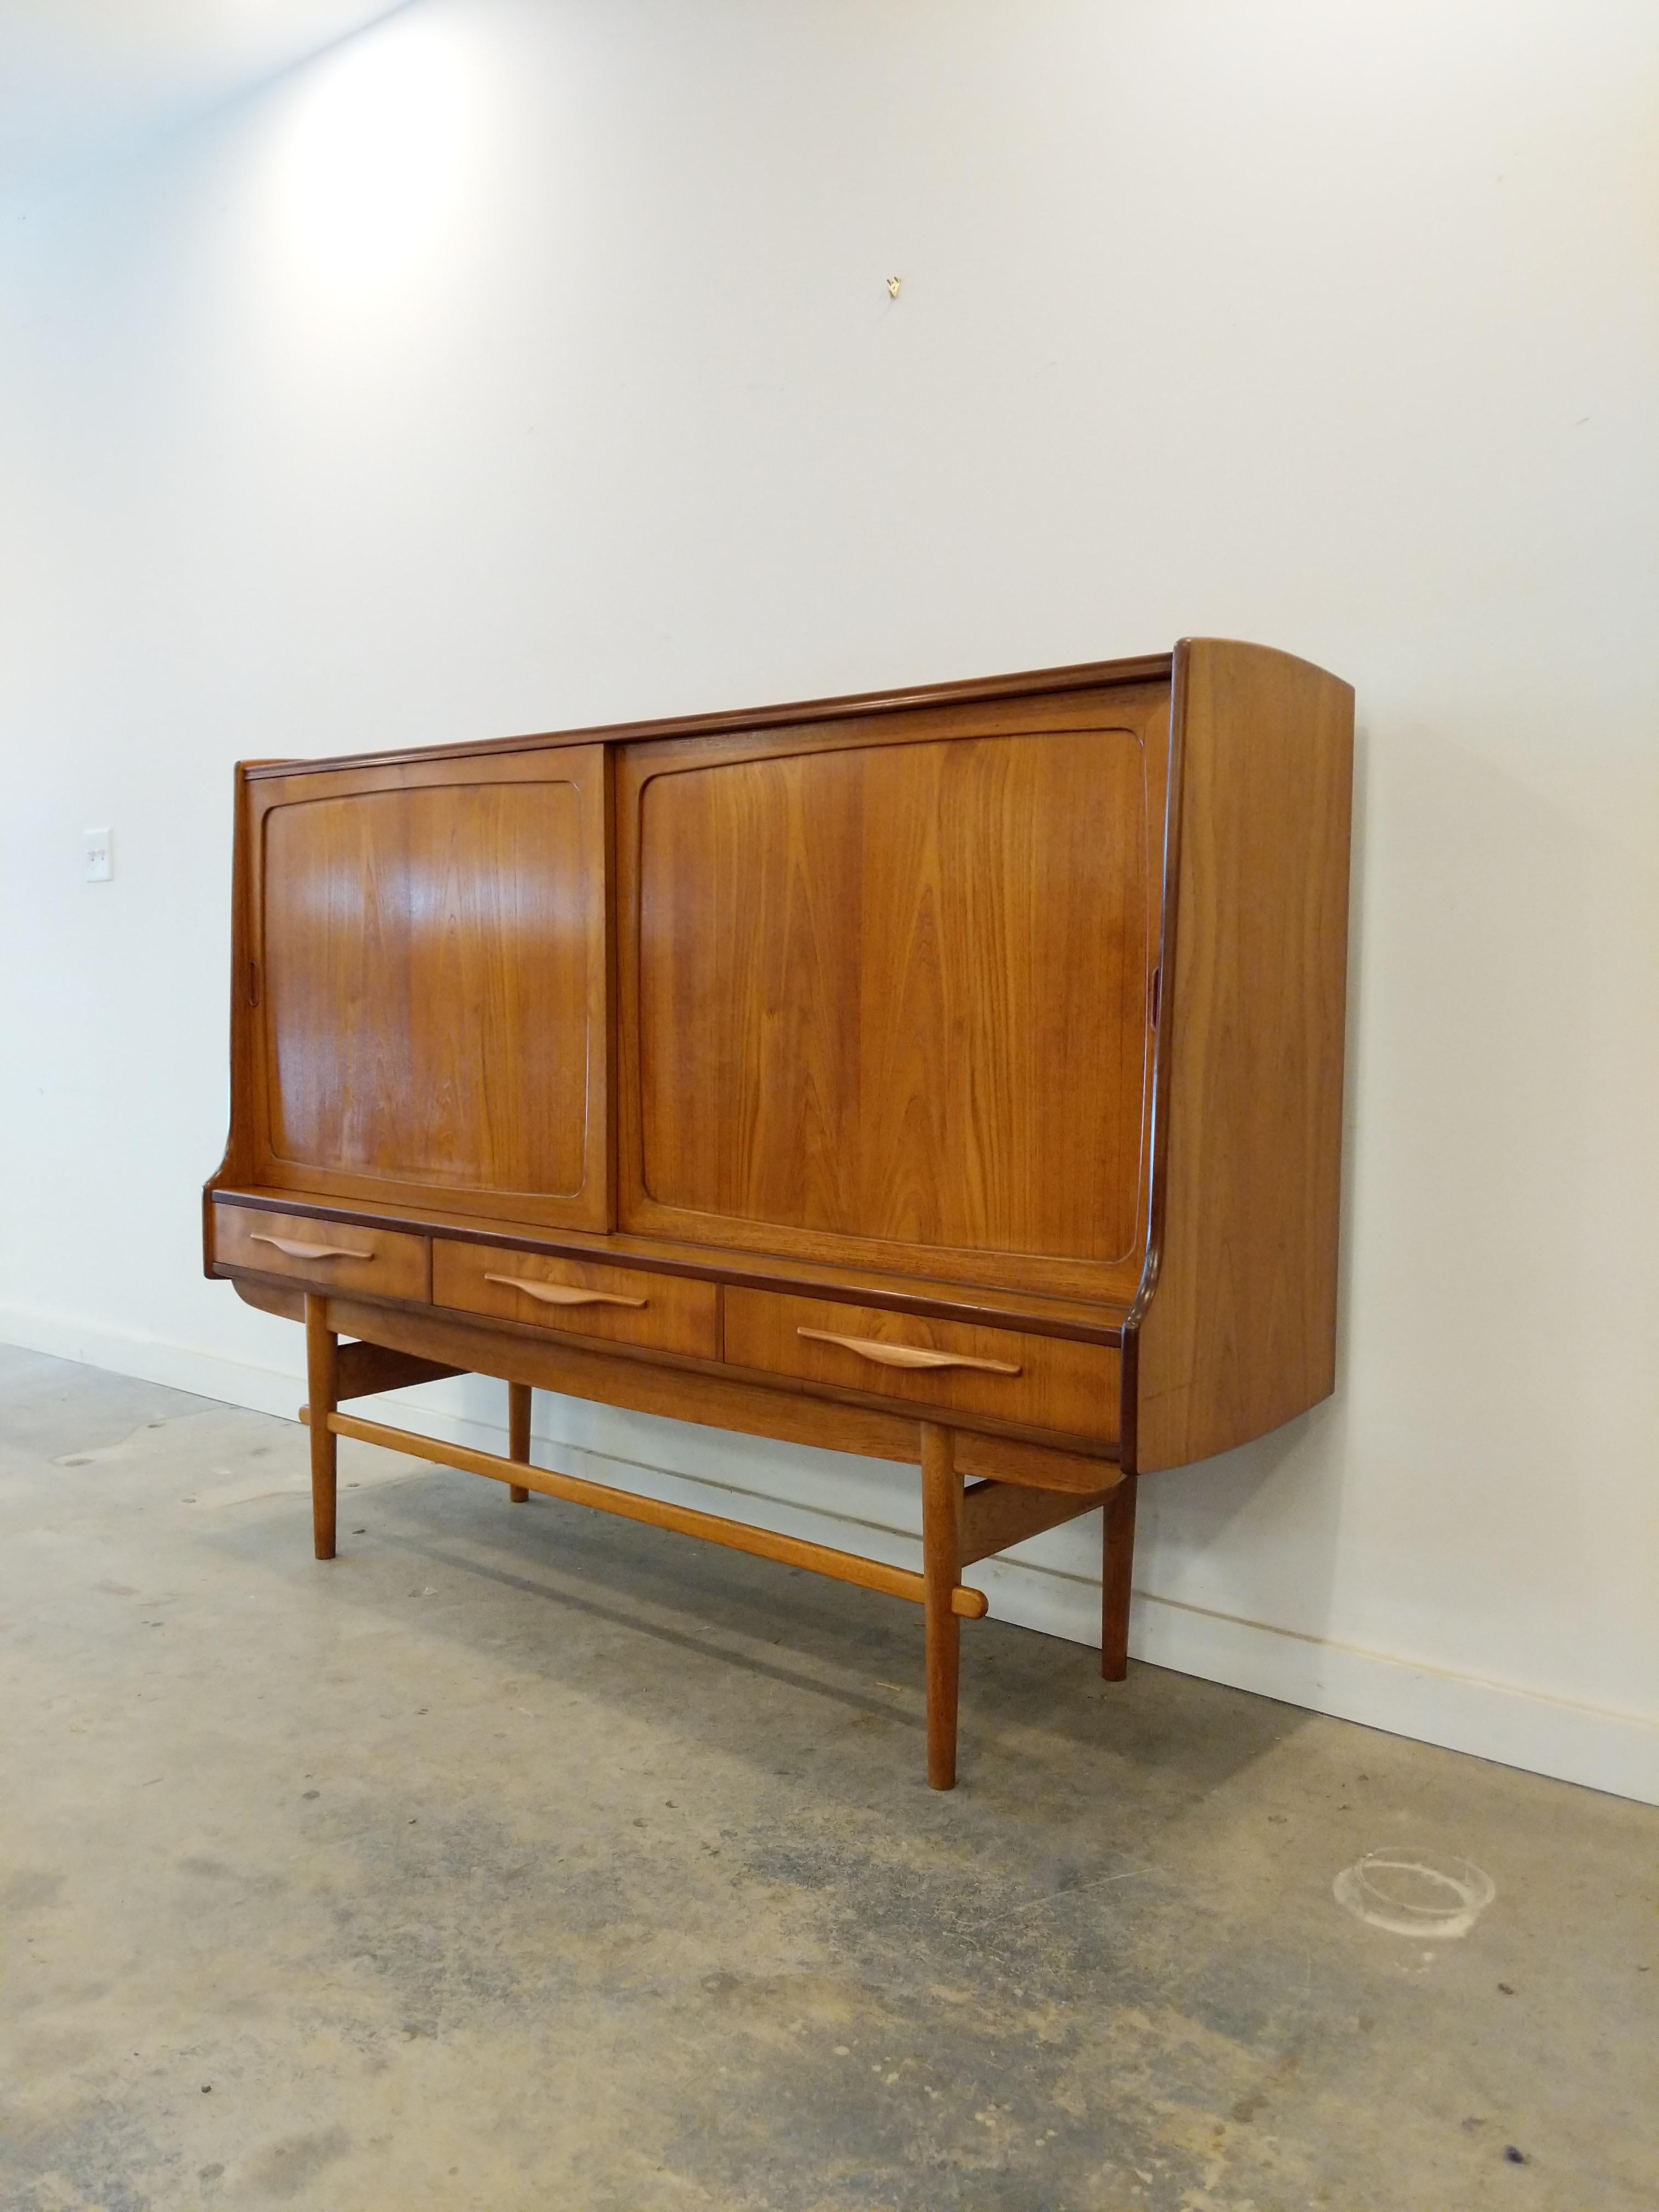 Authentic vintage mid century Danish / Scandinavian Modern teak sideboard / cabinet / server / buffet.

This piece is in excellent vintage condition with very few signs of age-related wear (see photos).

If you would like any additional details,